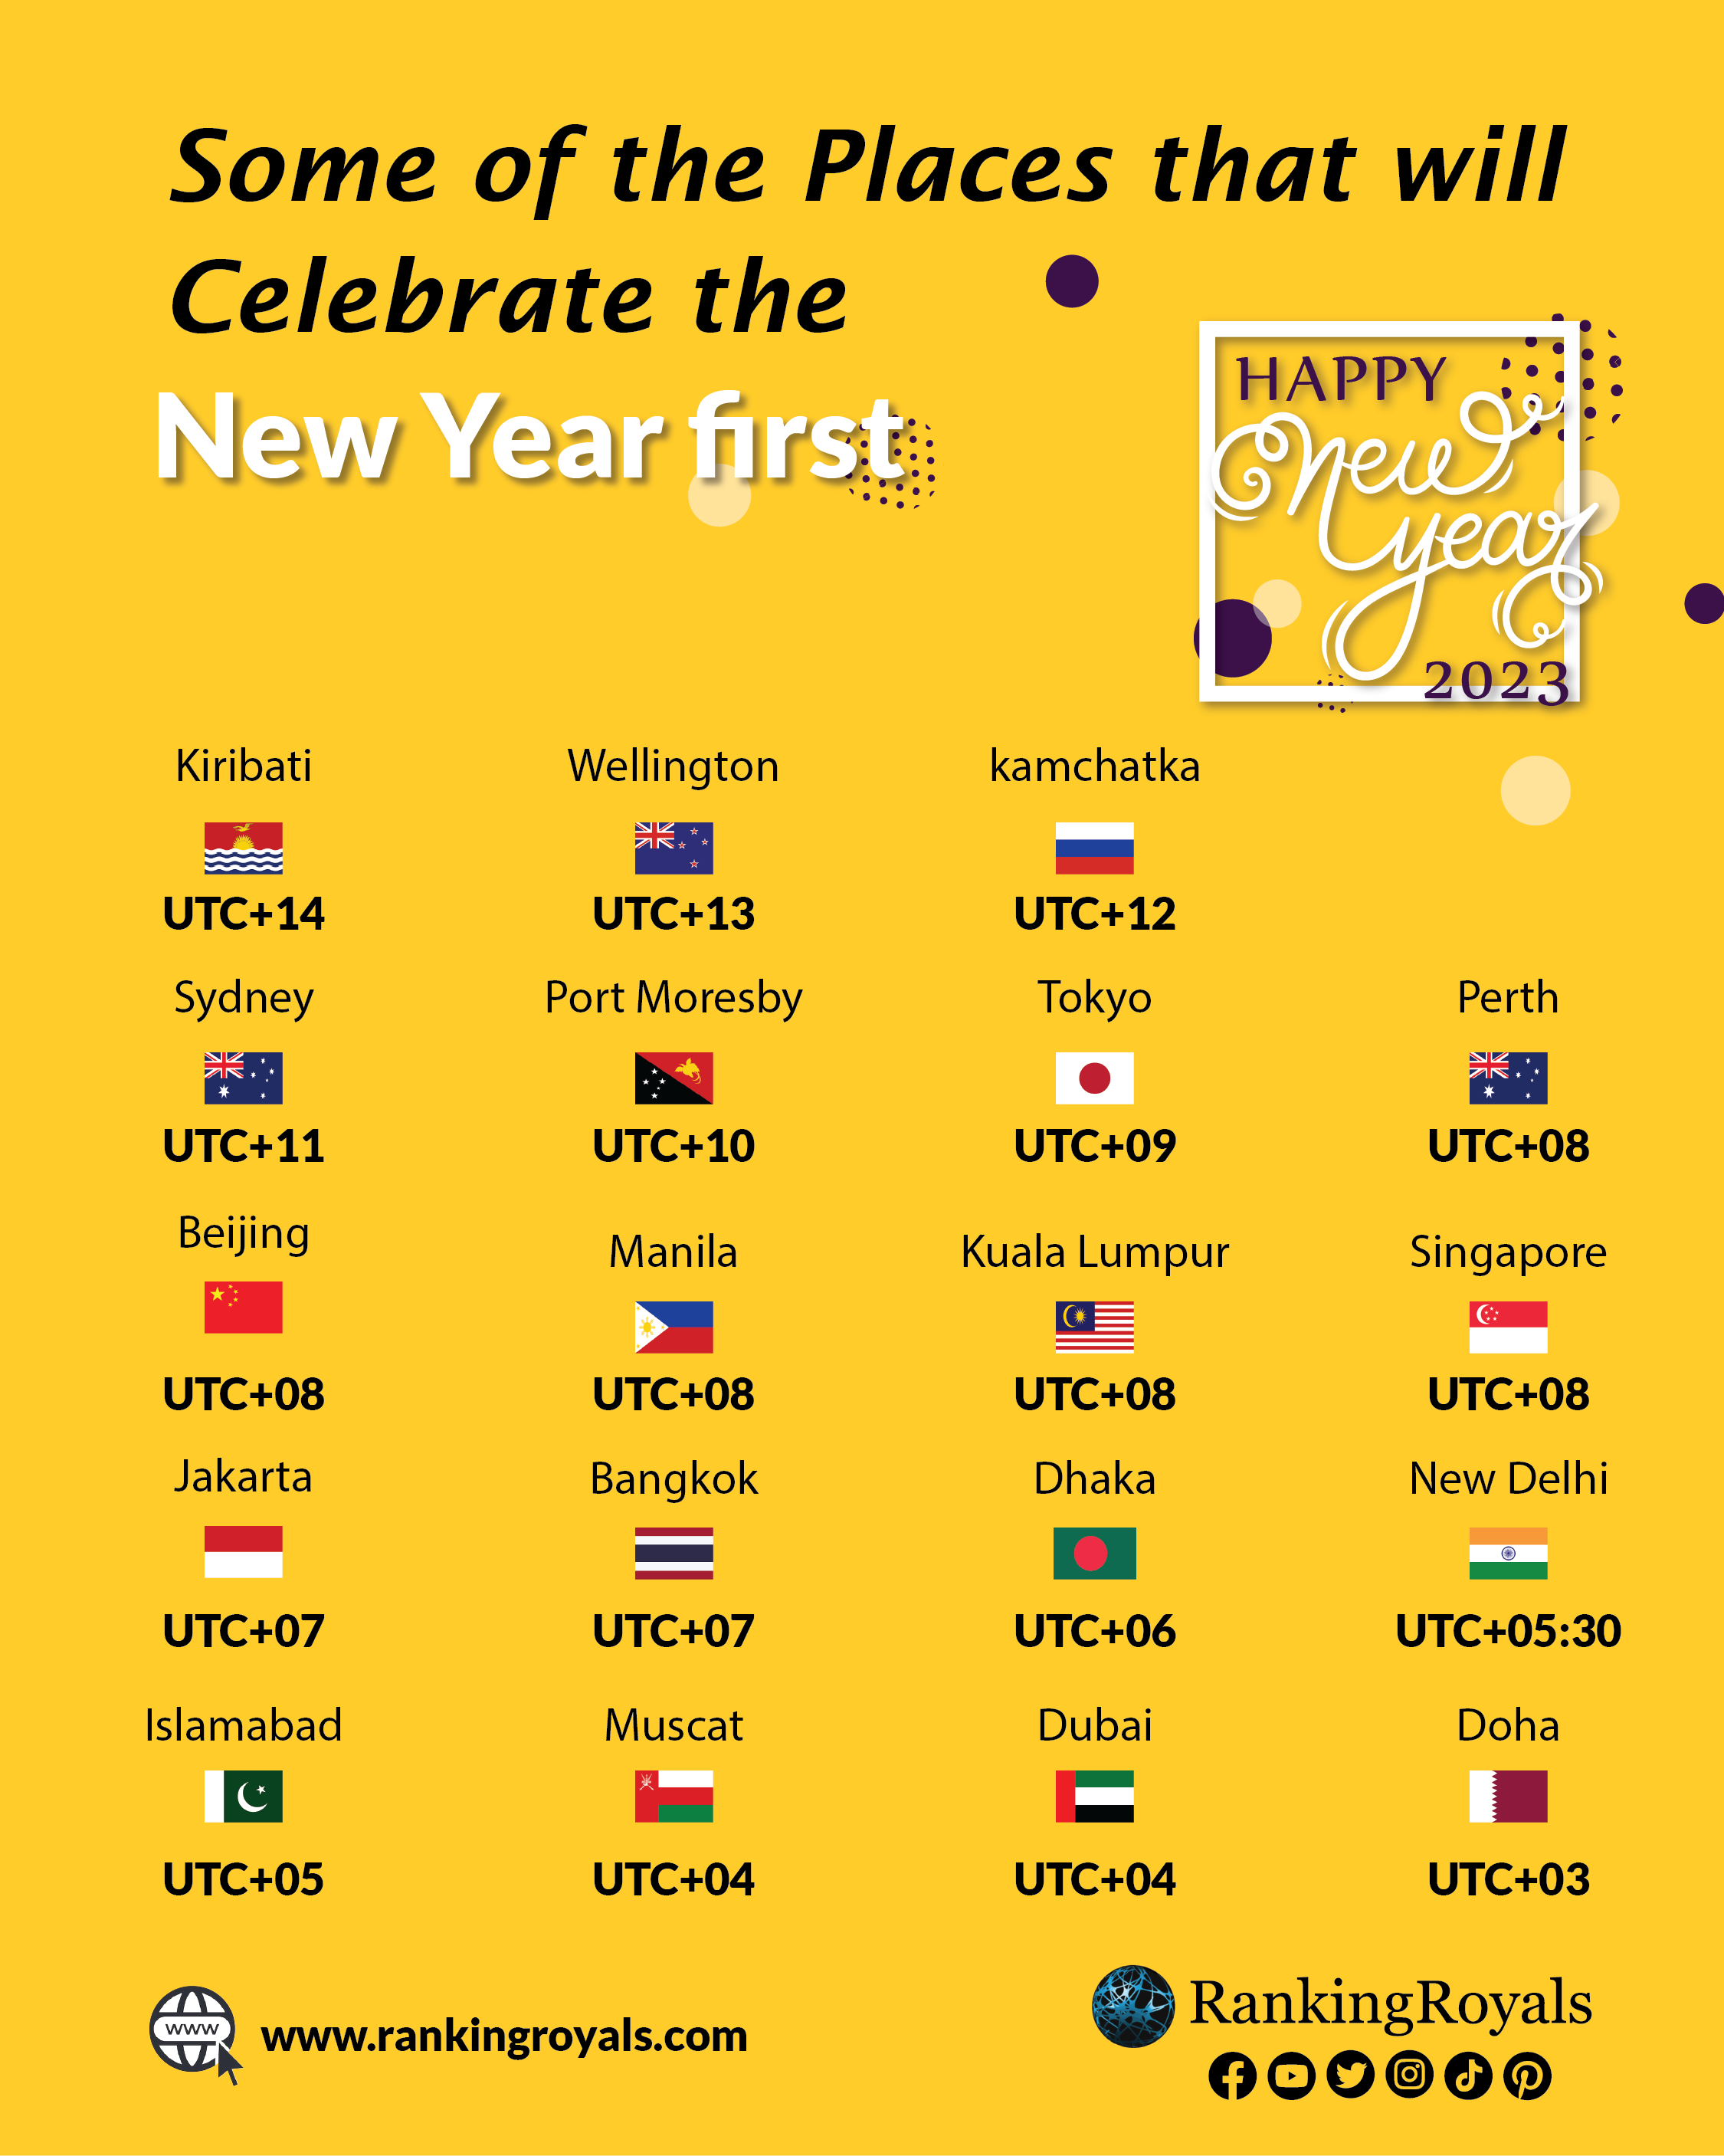 Some of the places that will celebrate the new year first